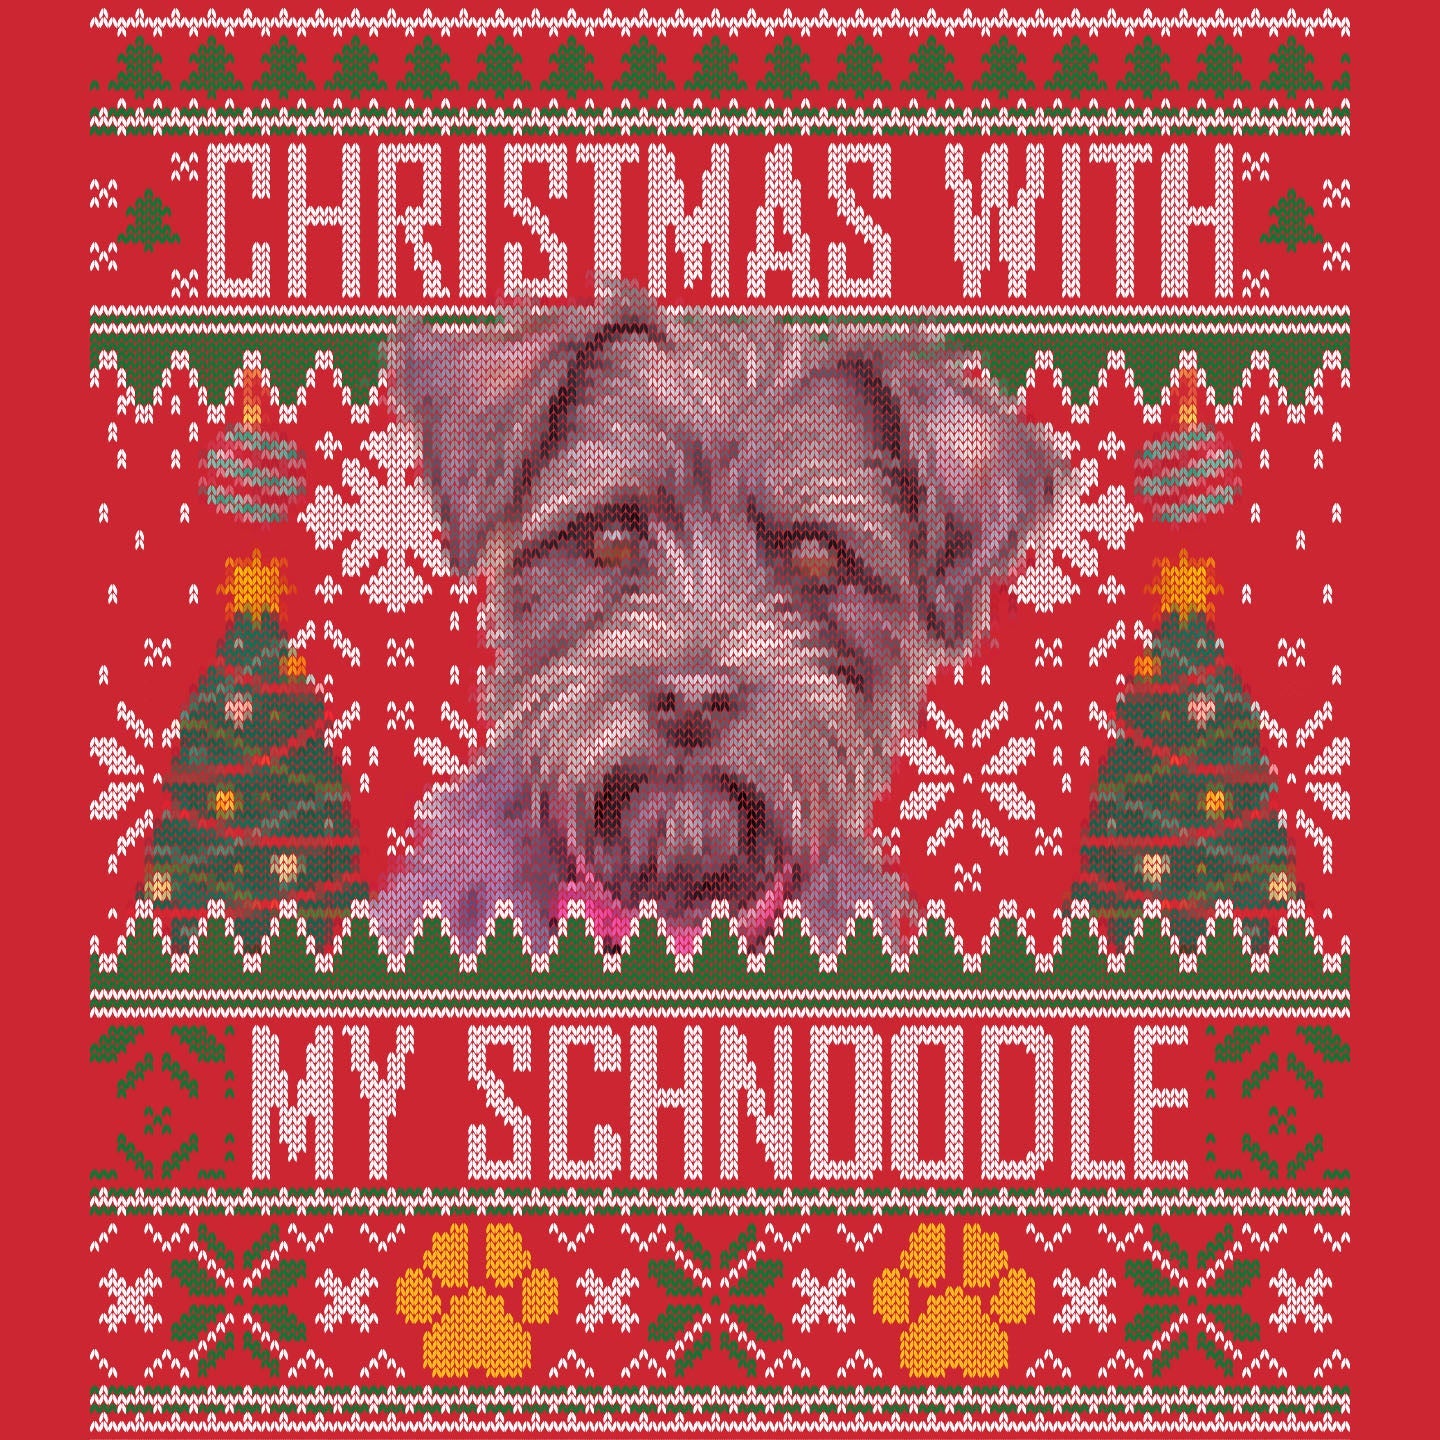 Ugly Sweater Christmas with My Schnoodle - Adult Unisex Long Sleeve T-Shirt